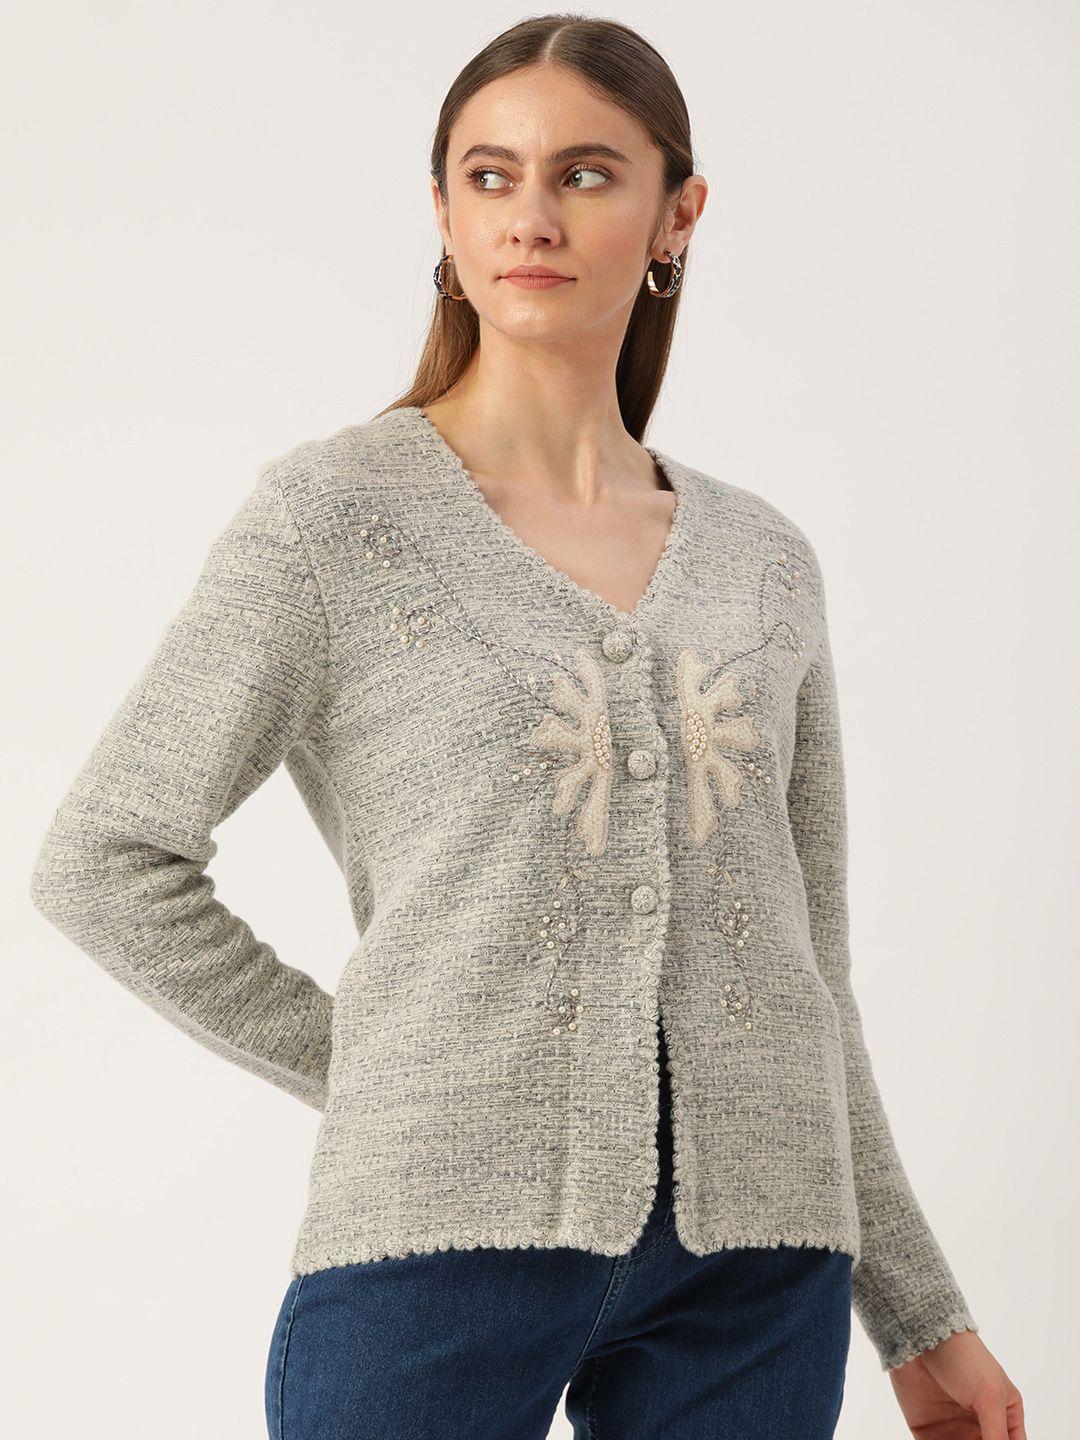 apsley-women-grey-floral-cardigan-with-embroidered-detail